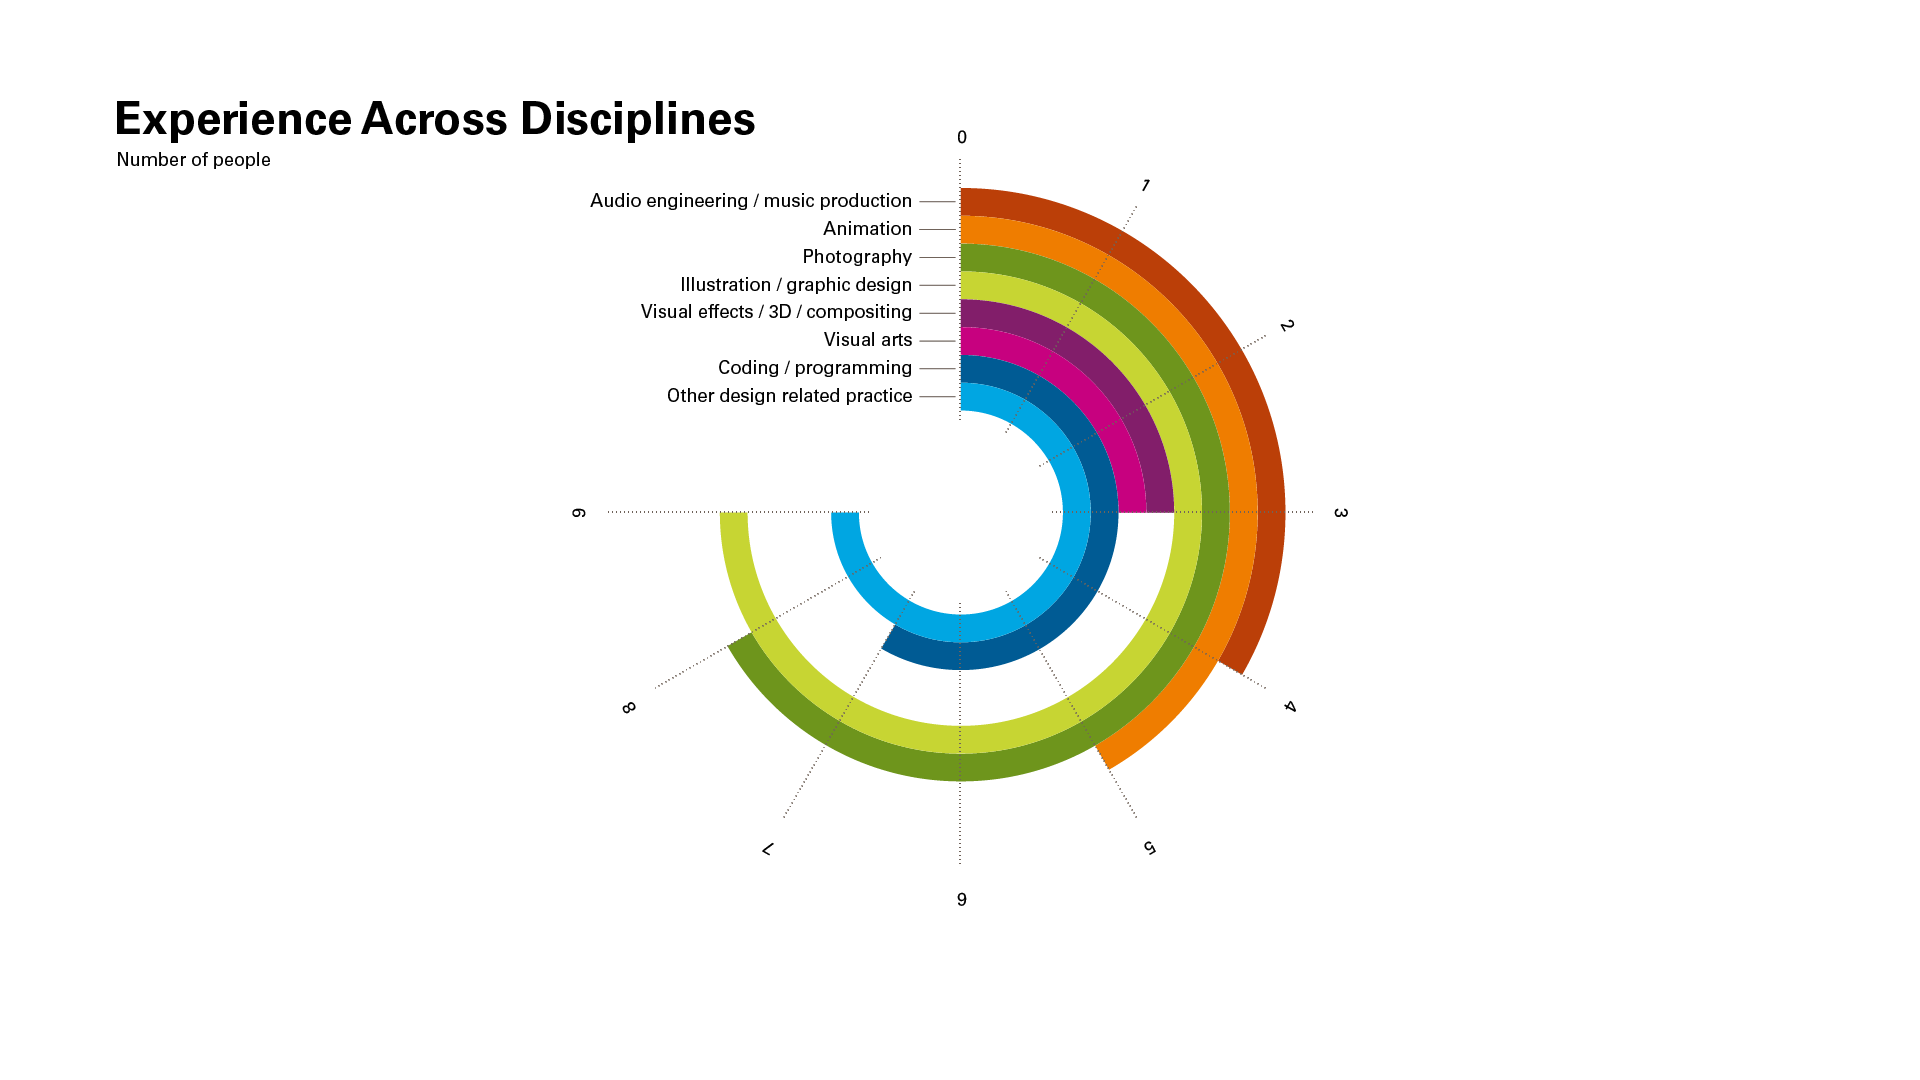 Data visualisation showing the number of people with experience across disciplines.